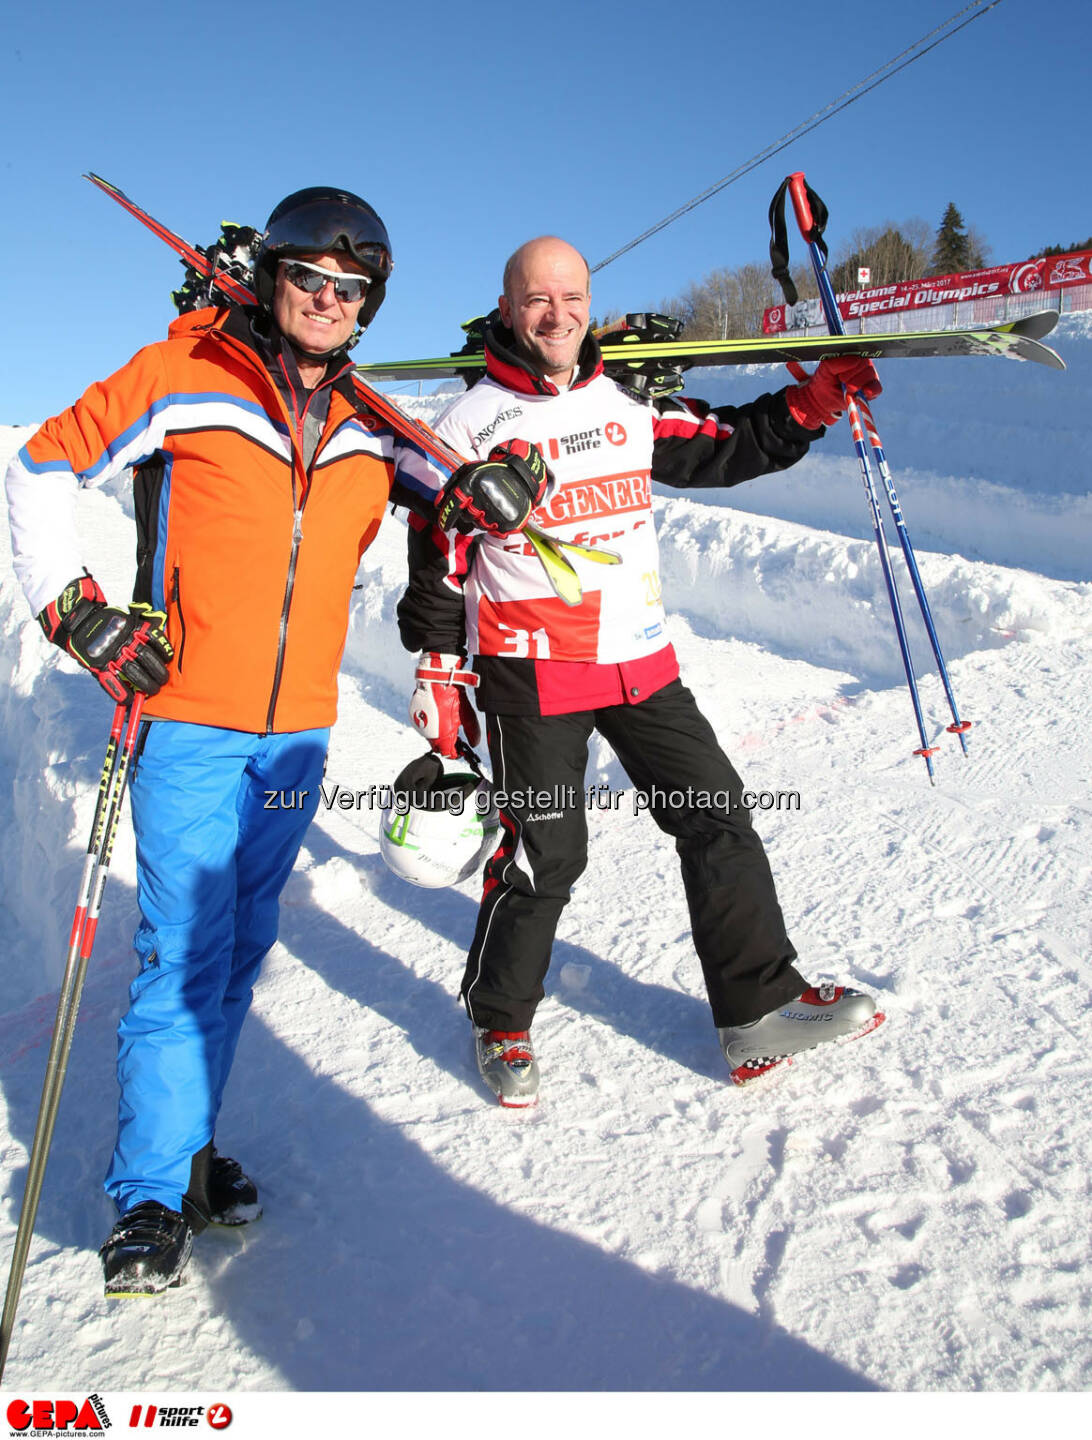 Ski for Gold Charity Race. Image shows managing director Harald Bauer (Sporthilfe) and Andy Lee Lang. Photo: GEPA pictures/ Harald Steiner